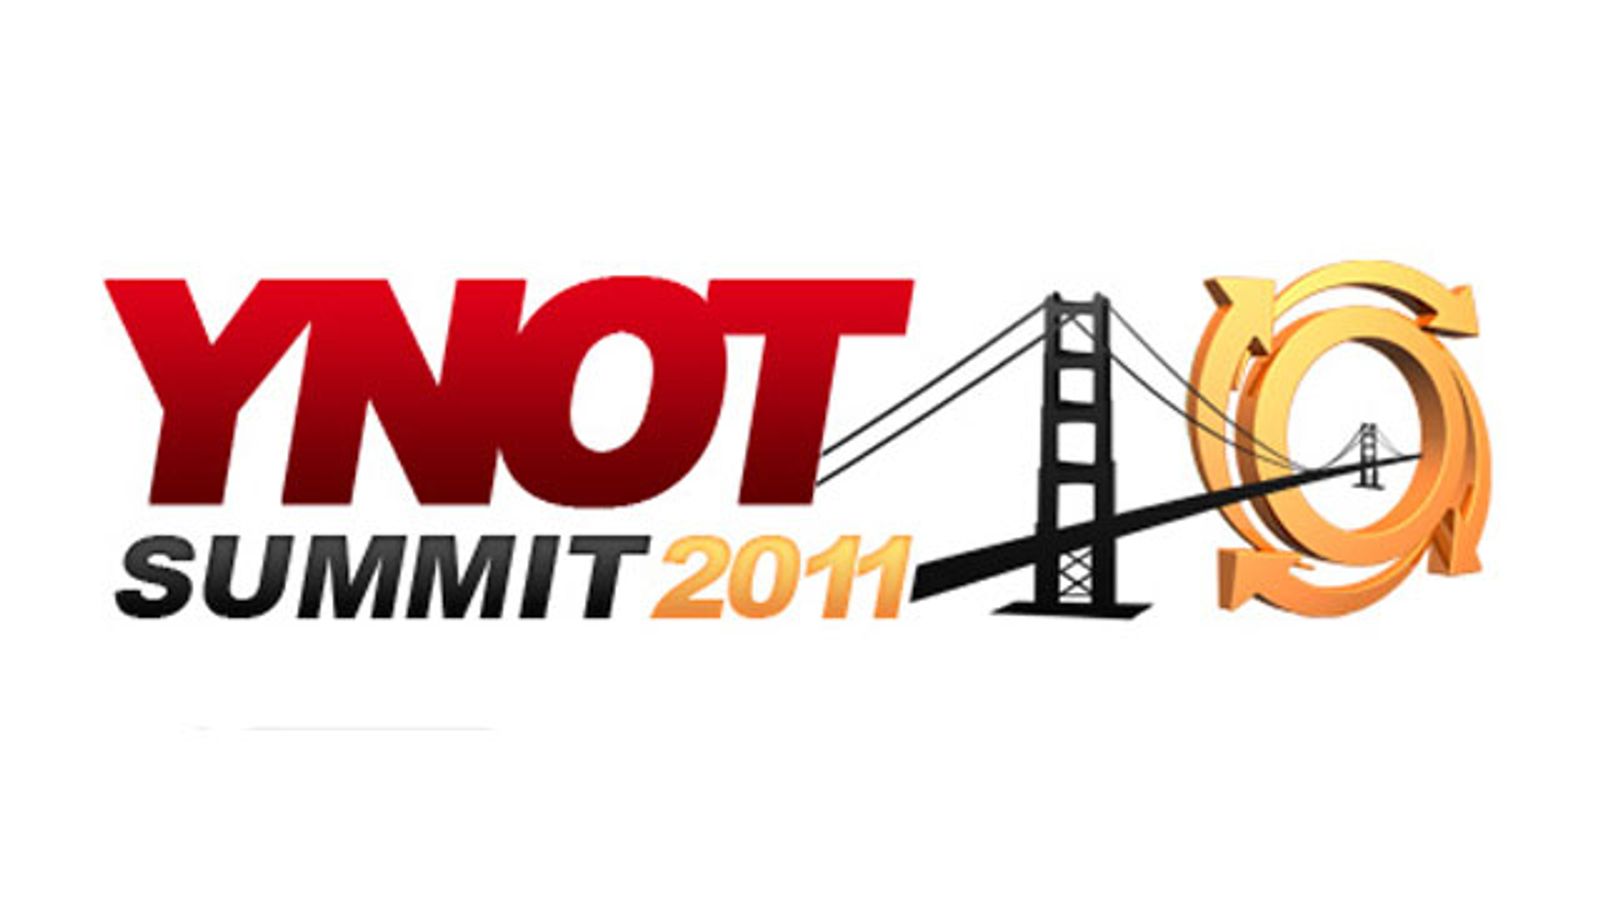 YNOT Summit Educational Tracks Offer Advice, Perspective, Hands-On Technique